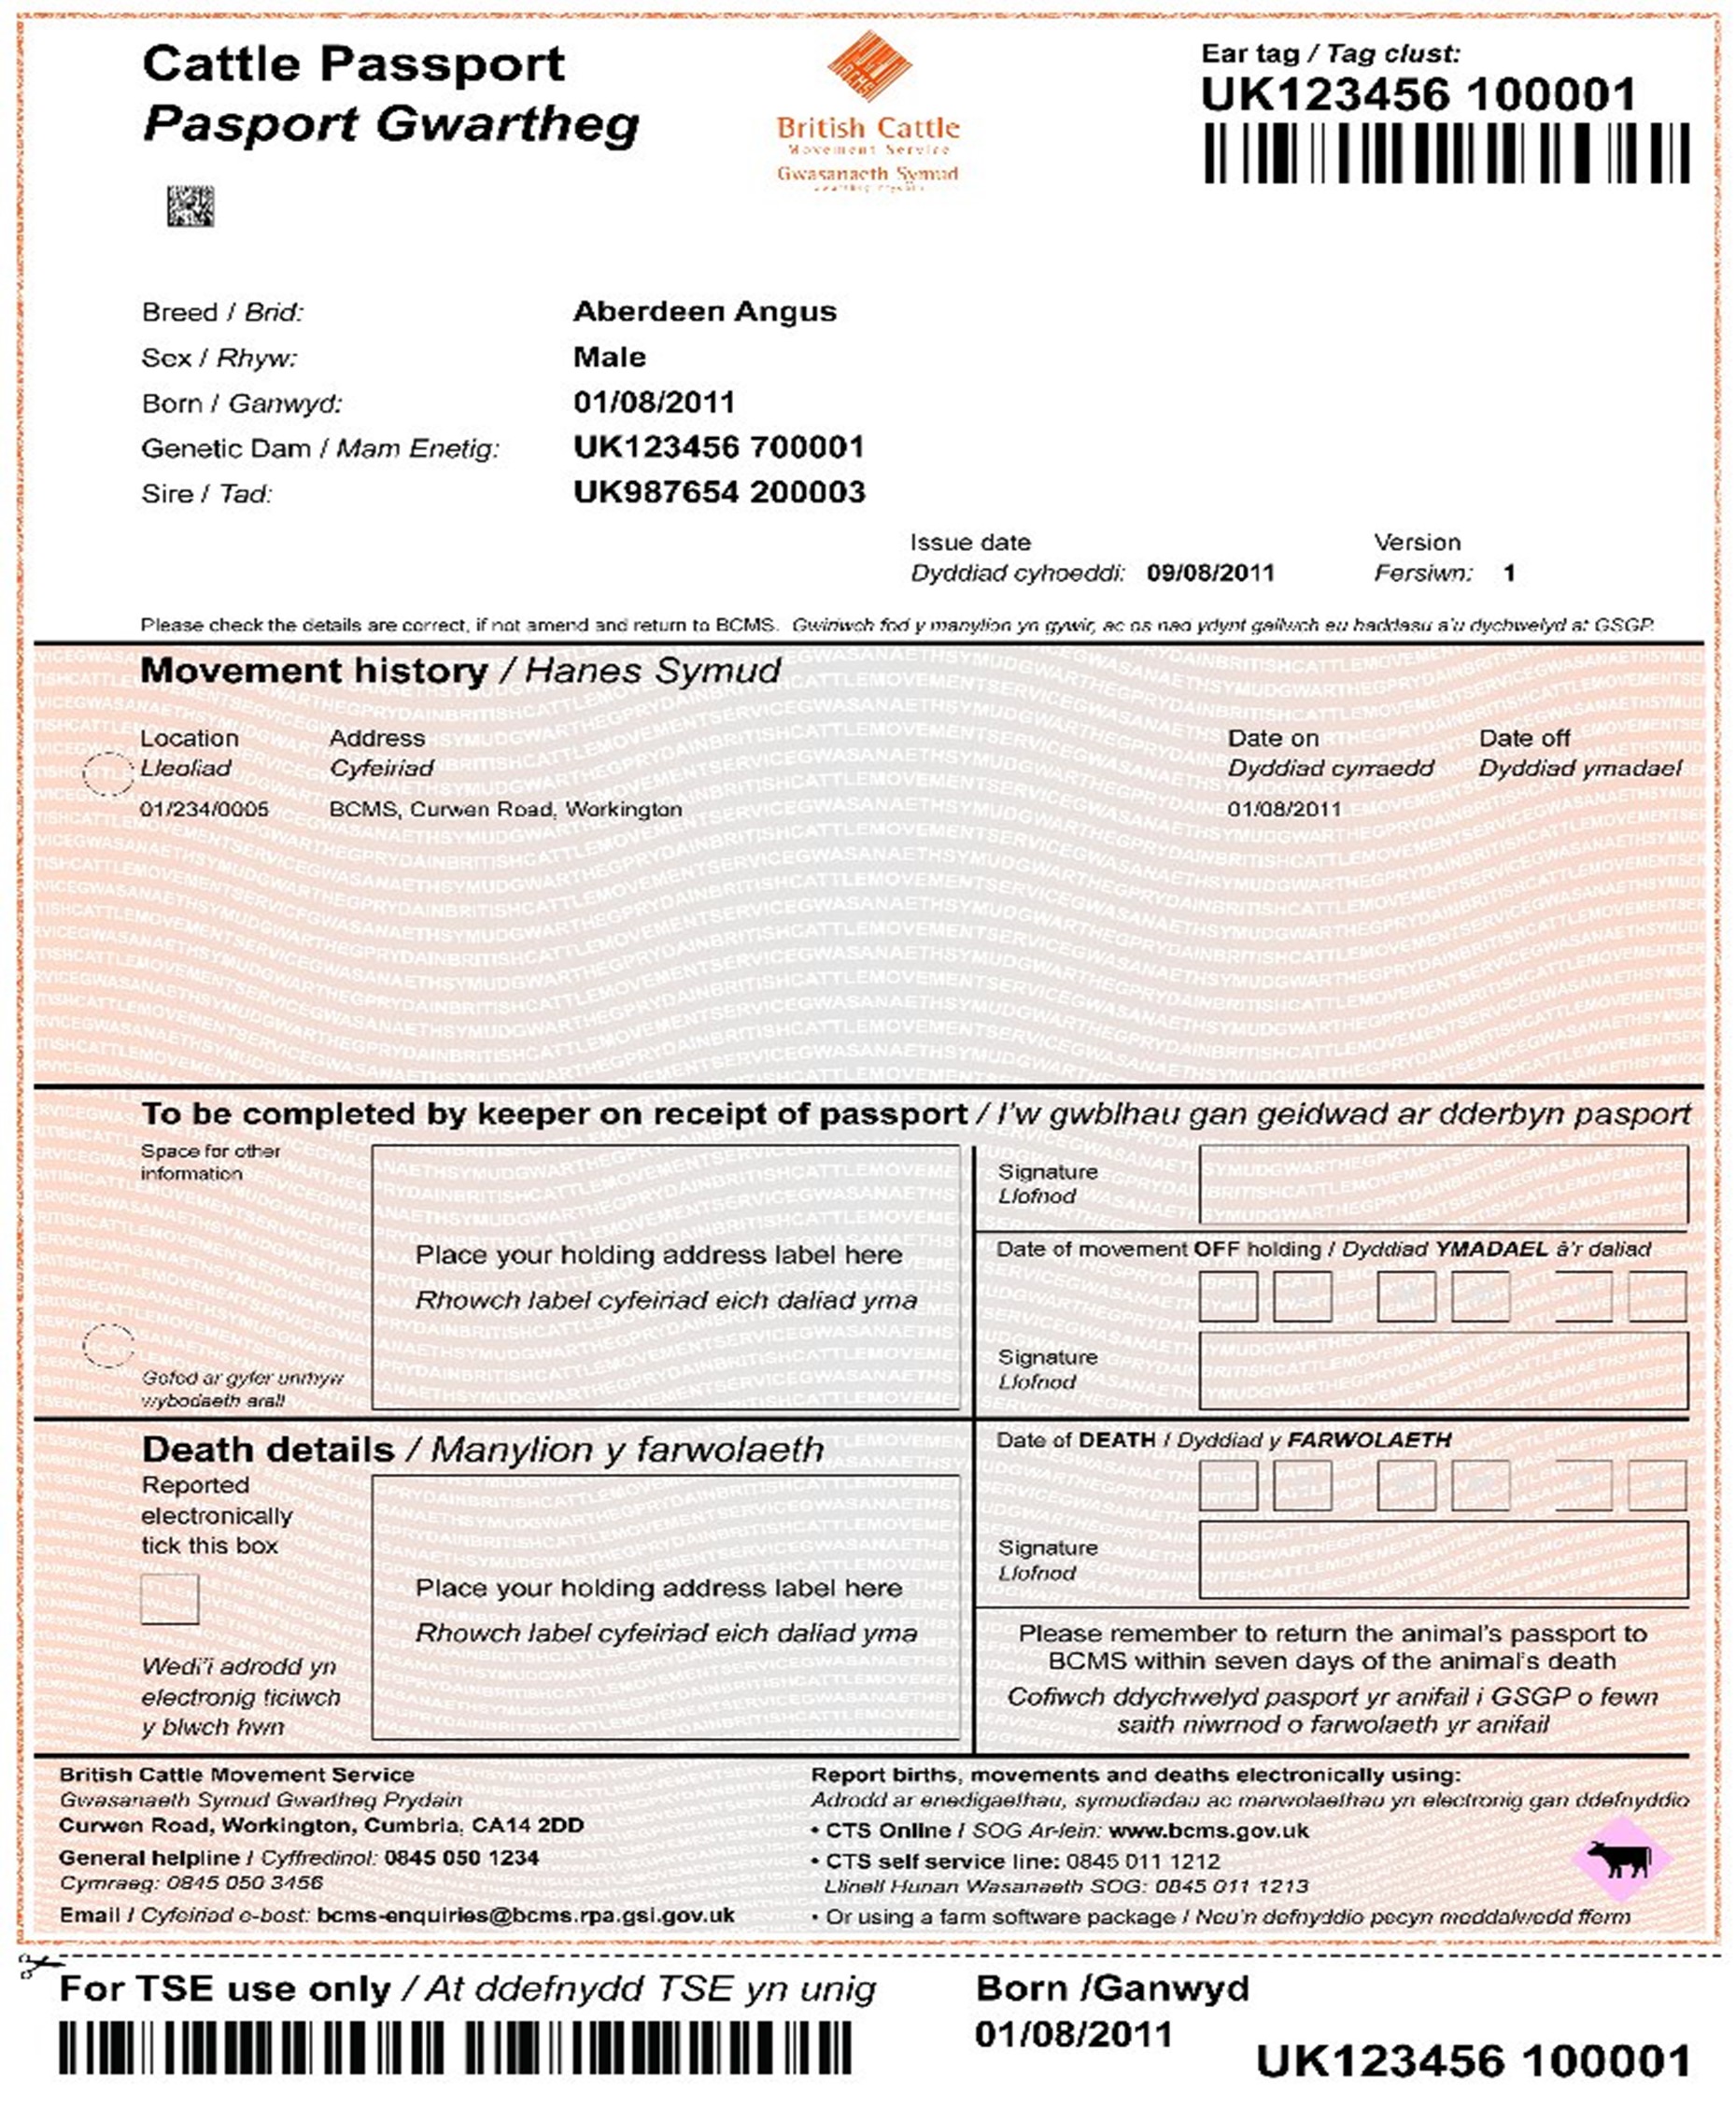 CPP 52 front non-bovine  Sample copy of the cattle identification document CPP 52 non-imported bovine (front page) document.